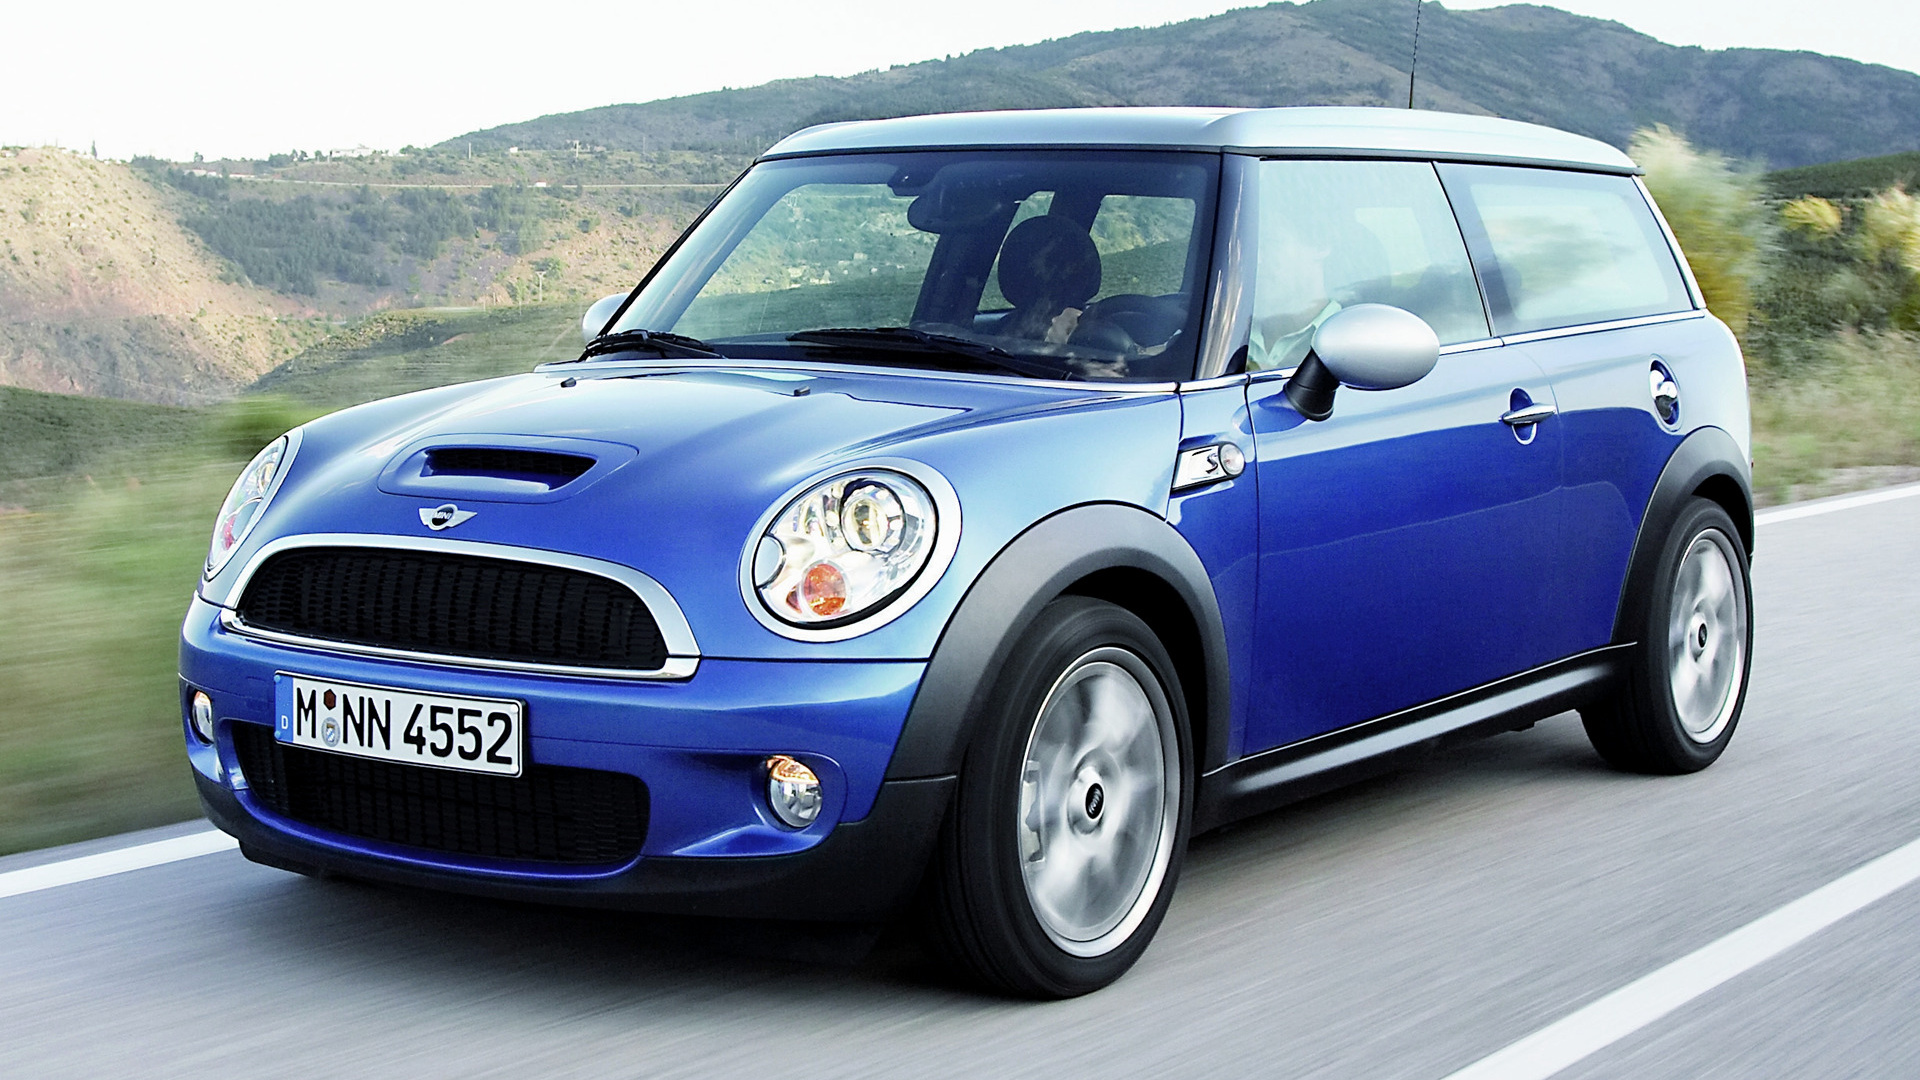 Mini Cooper S Clubman (2007) Wallpapers and HD Images - Car Pixel